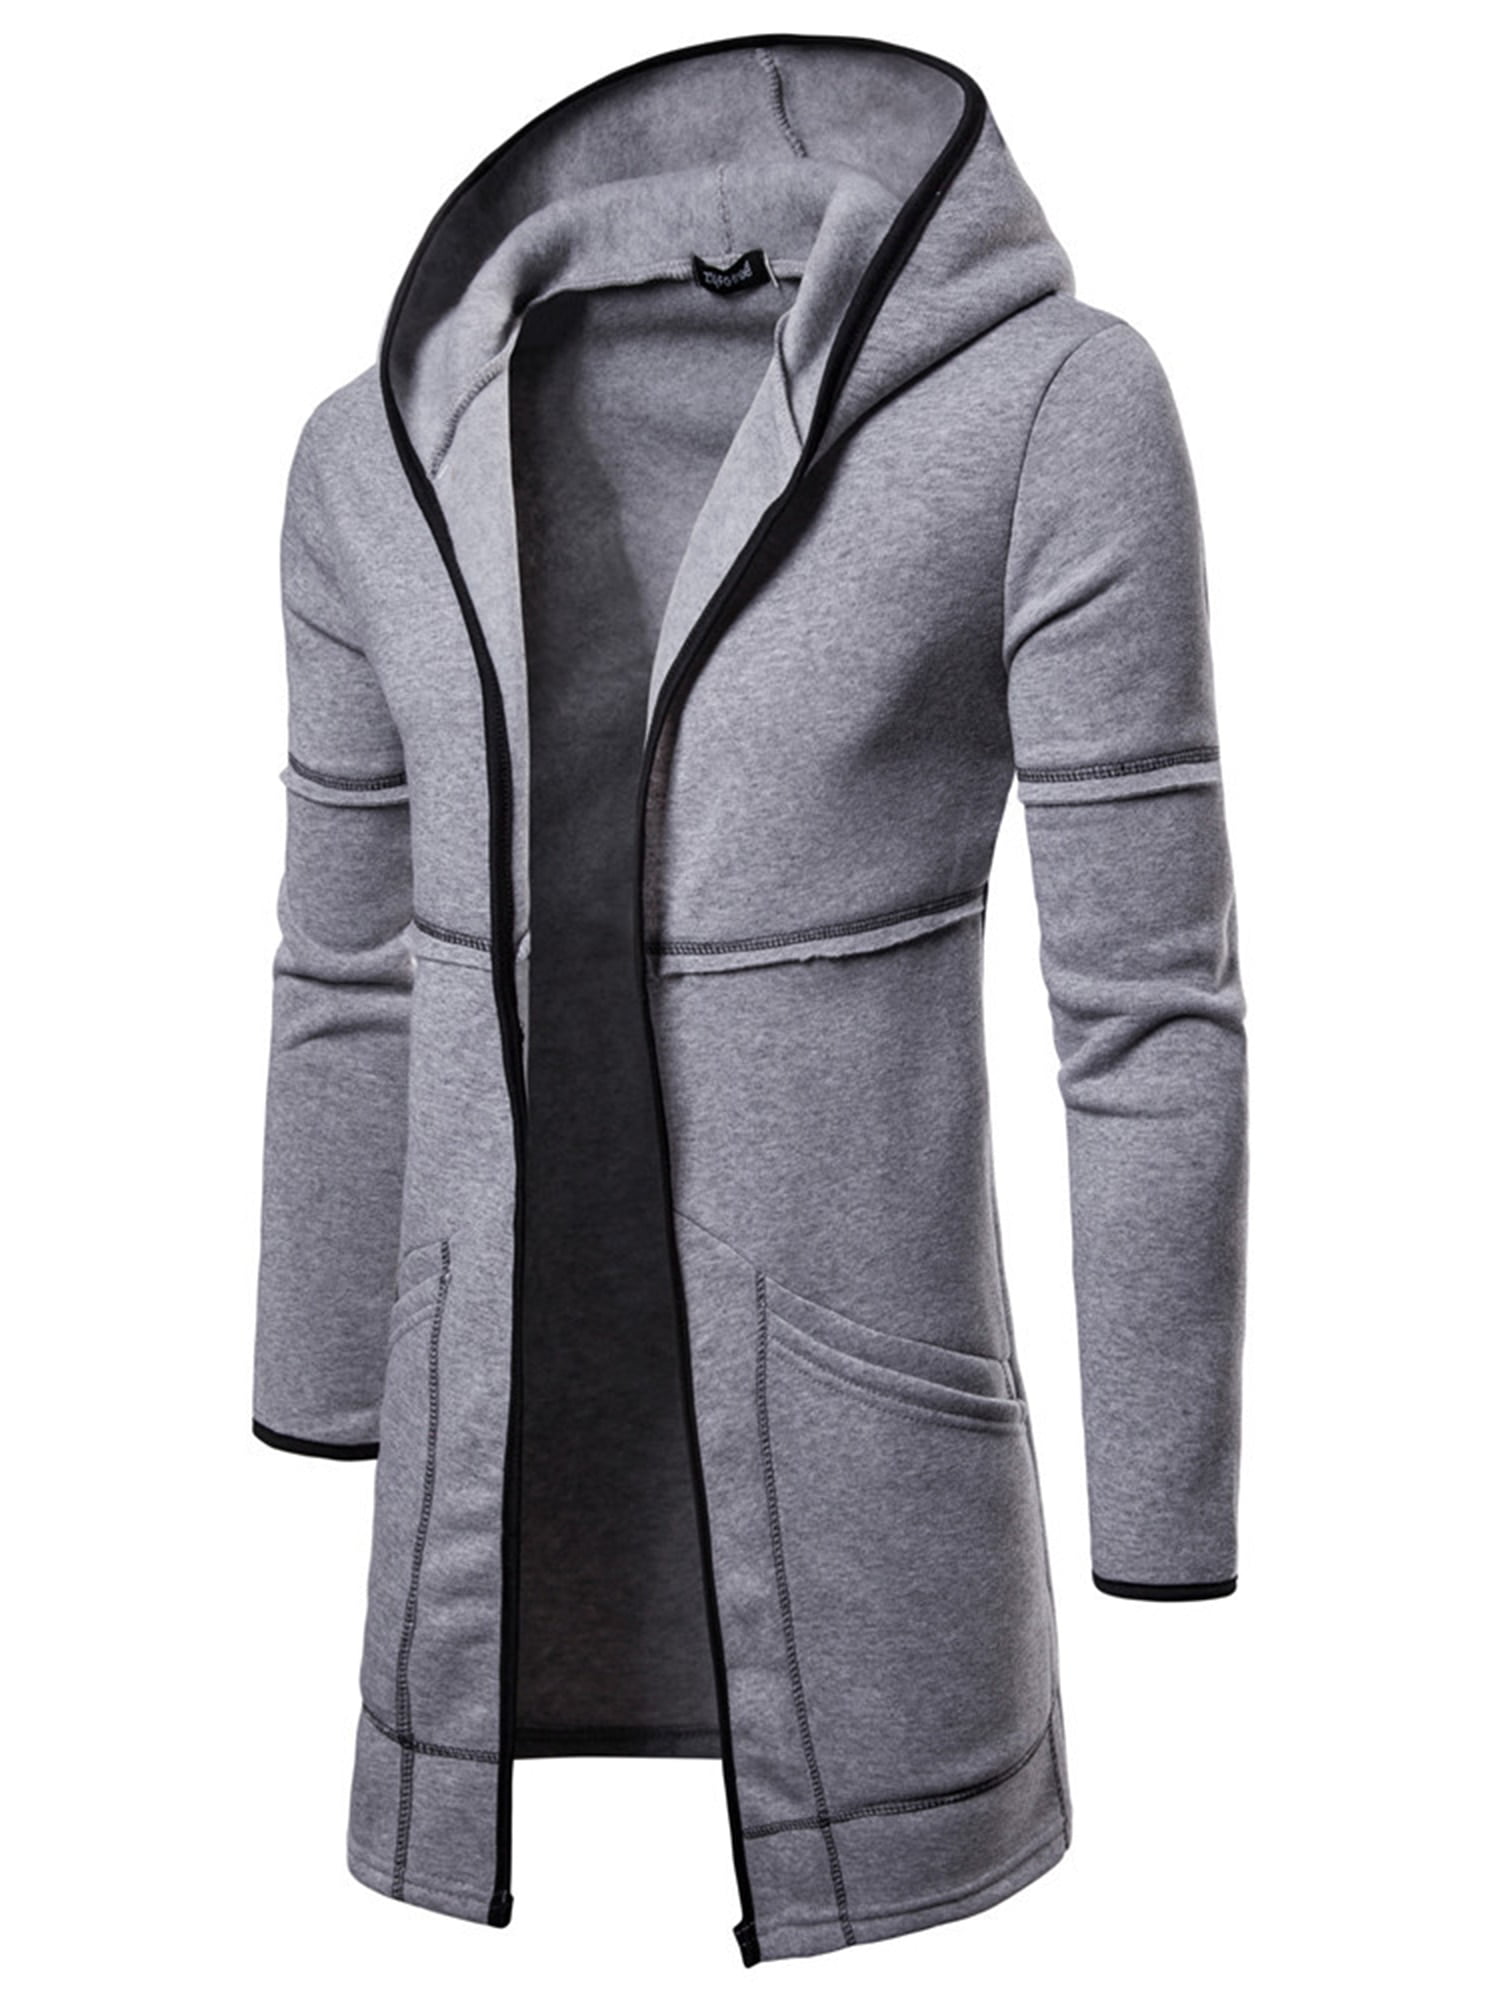 MmNote Mens Hooded Solid Trench Coat Jacket Open Front Cardigan Long Sleeve Outwear Jacket 